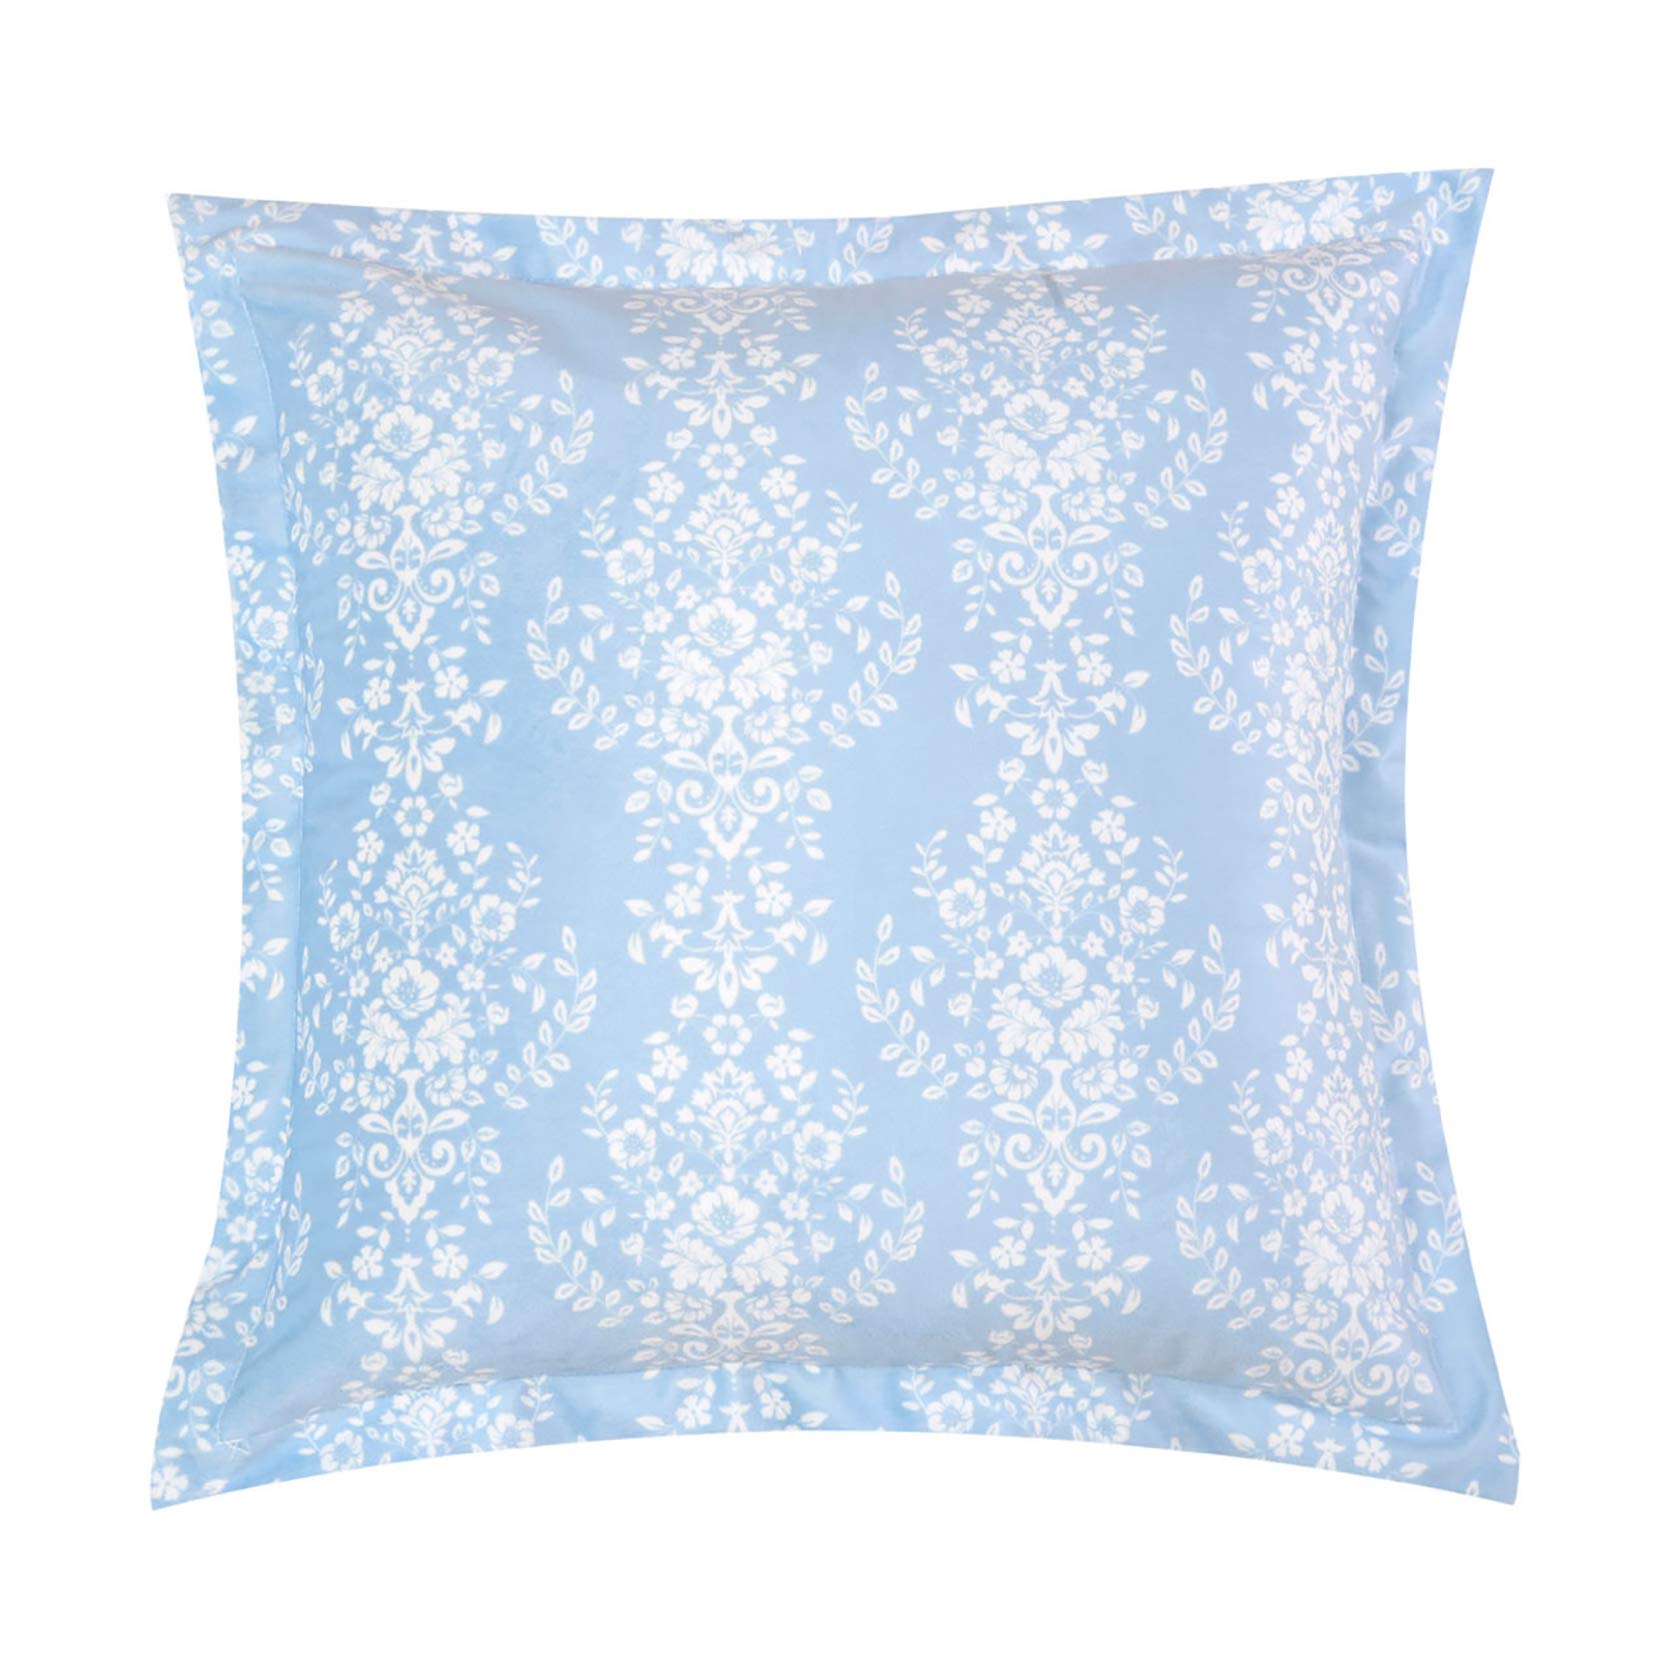 Ravello Blue Square Filled Cushion 43 x 43cm by Bianca